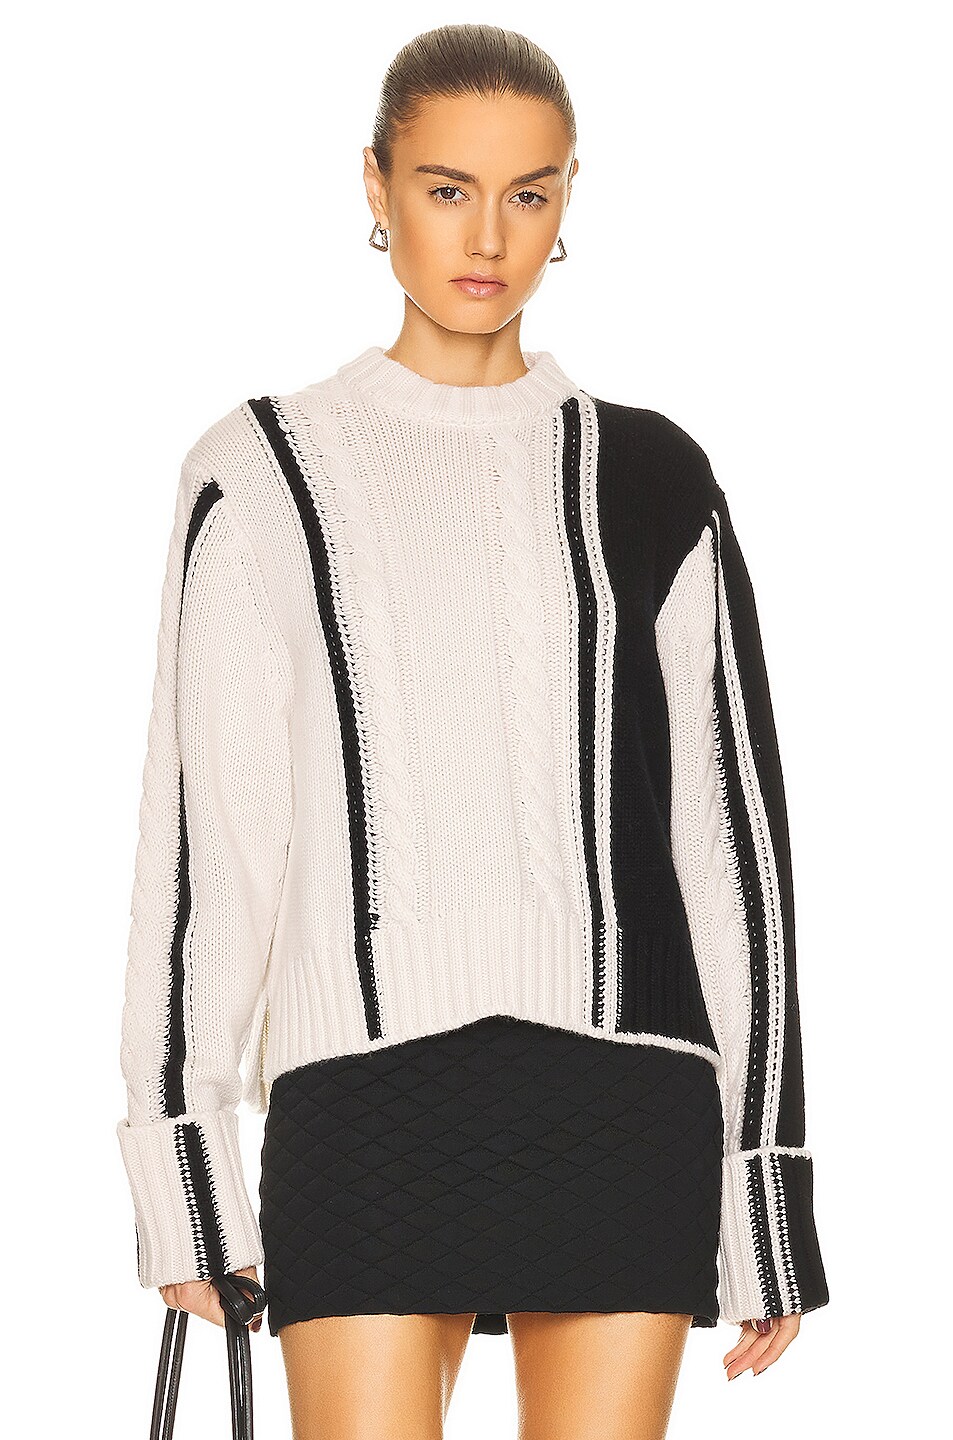 Loulou Studio Eike Cable Knit Sweater in Black & Ivory | FWRD